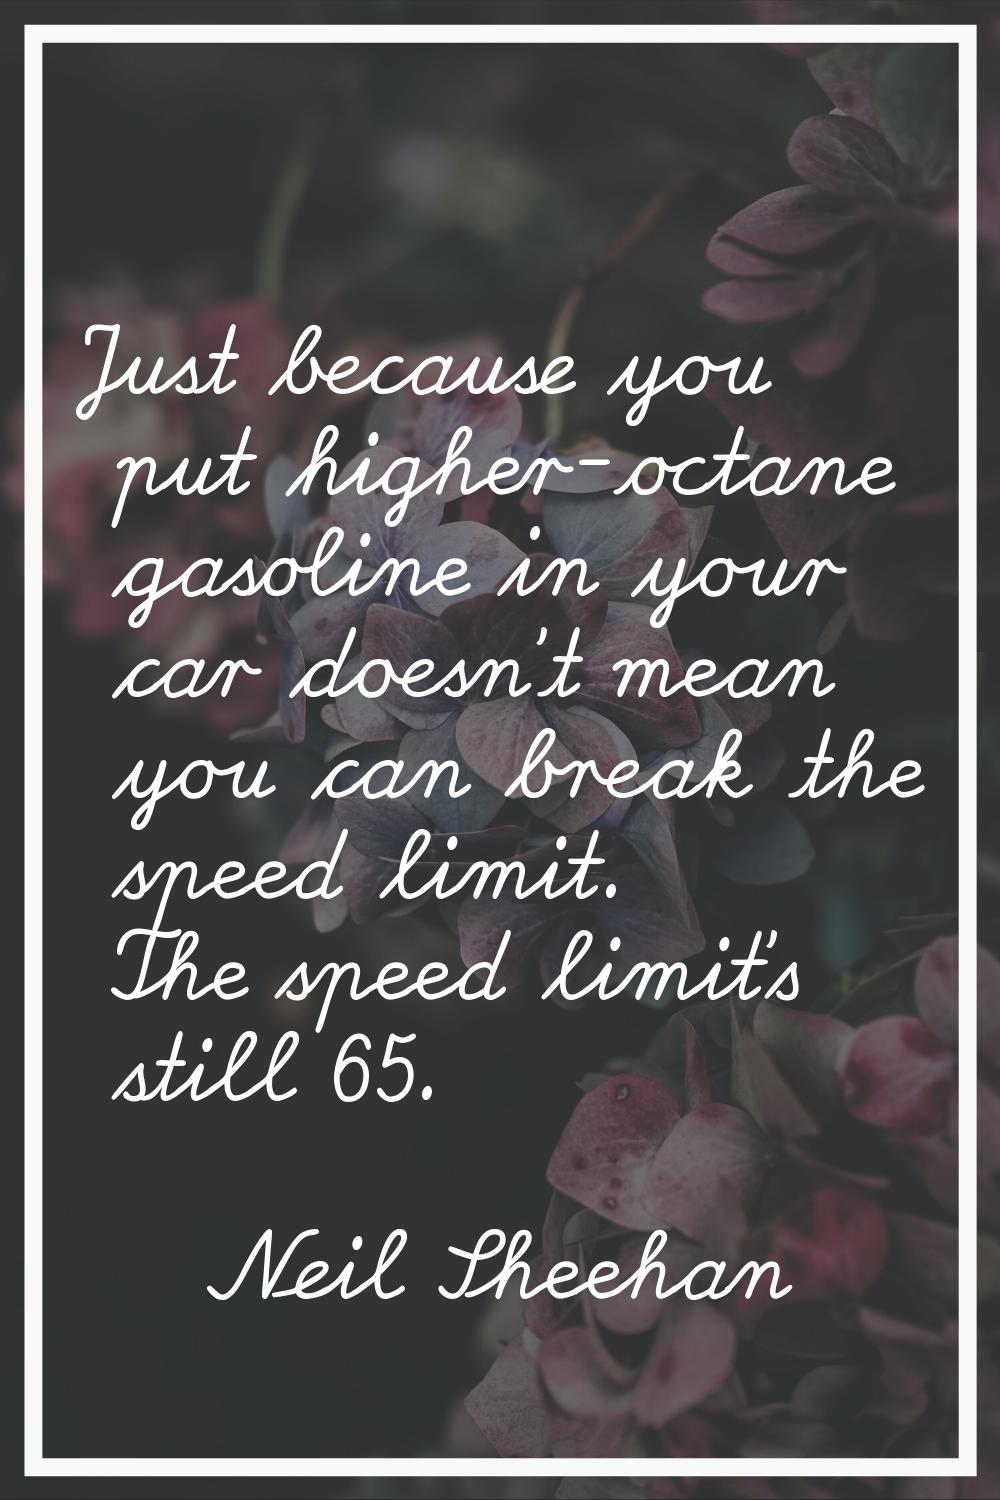 Just because you put higher-octane gasoline in your car doesn't mean you can break the speed limit.